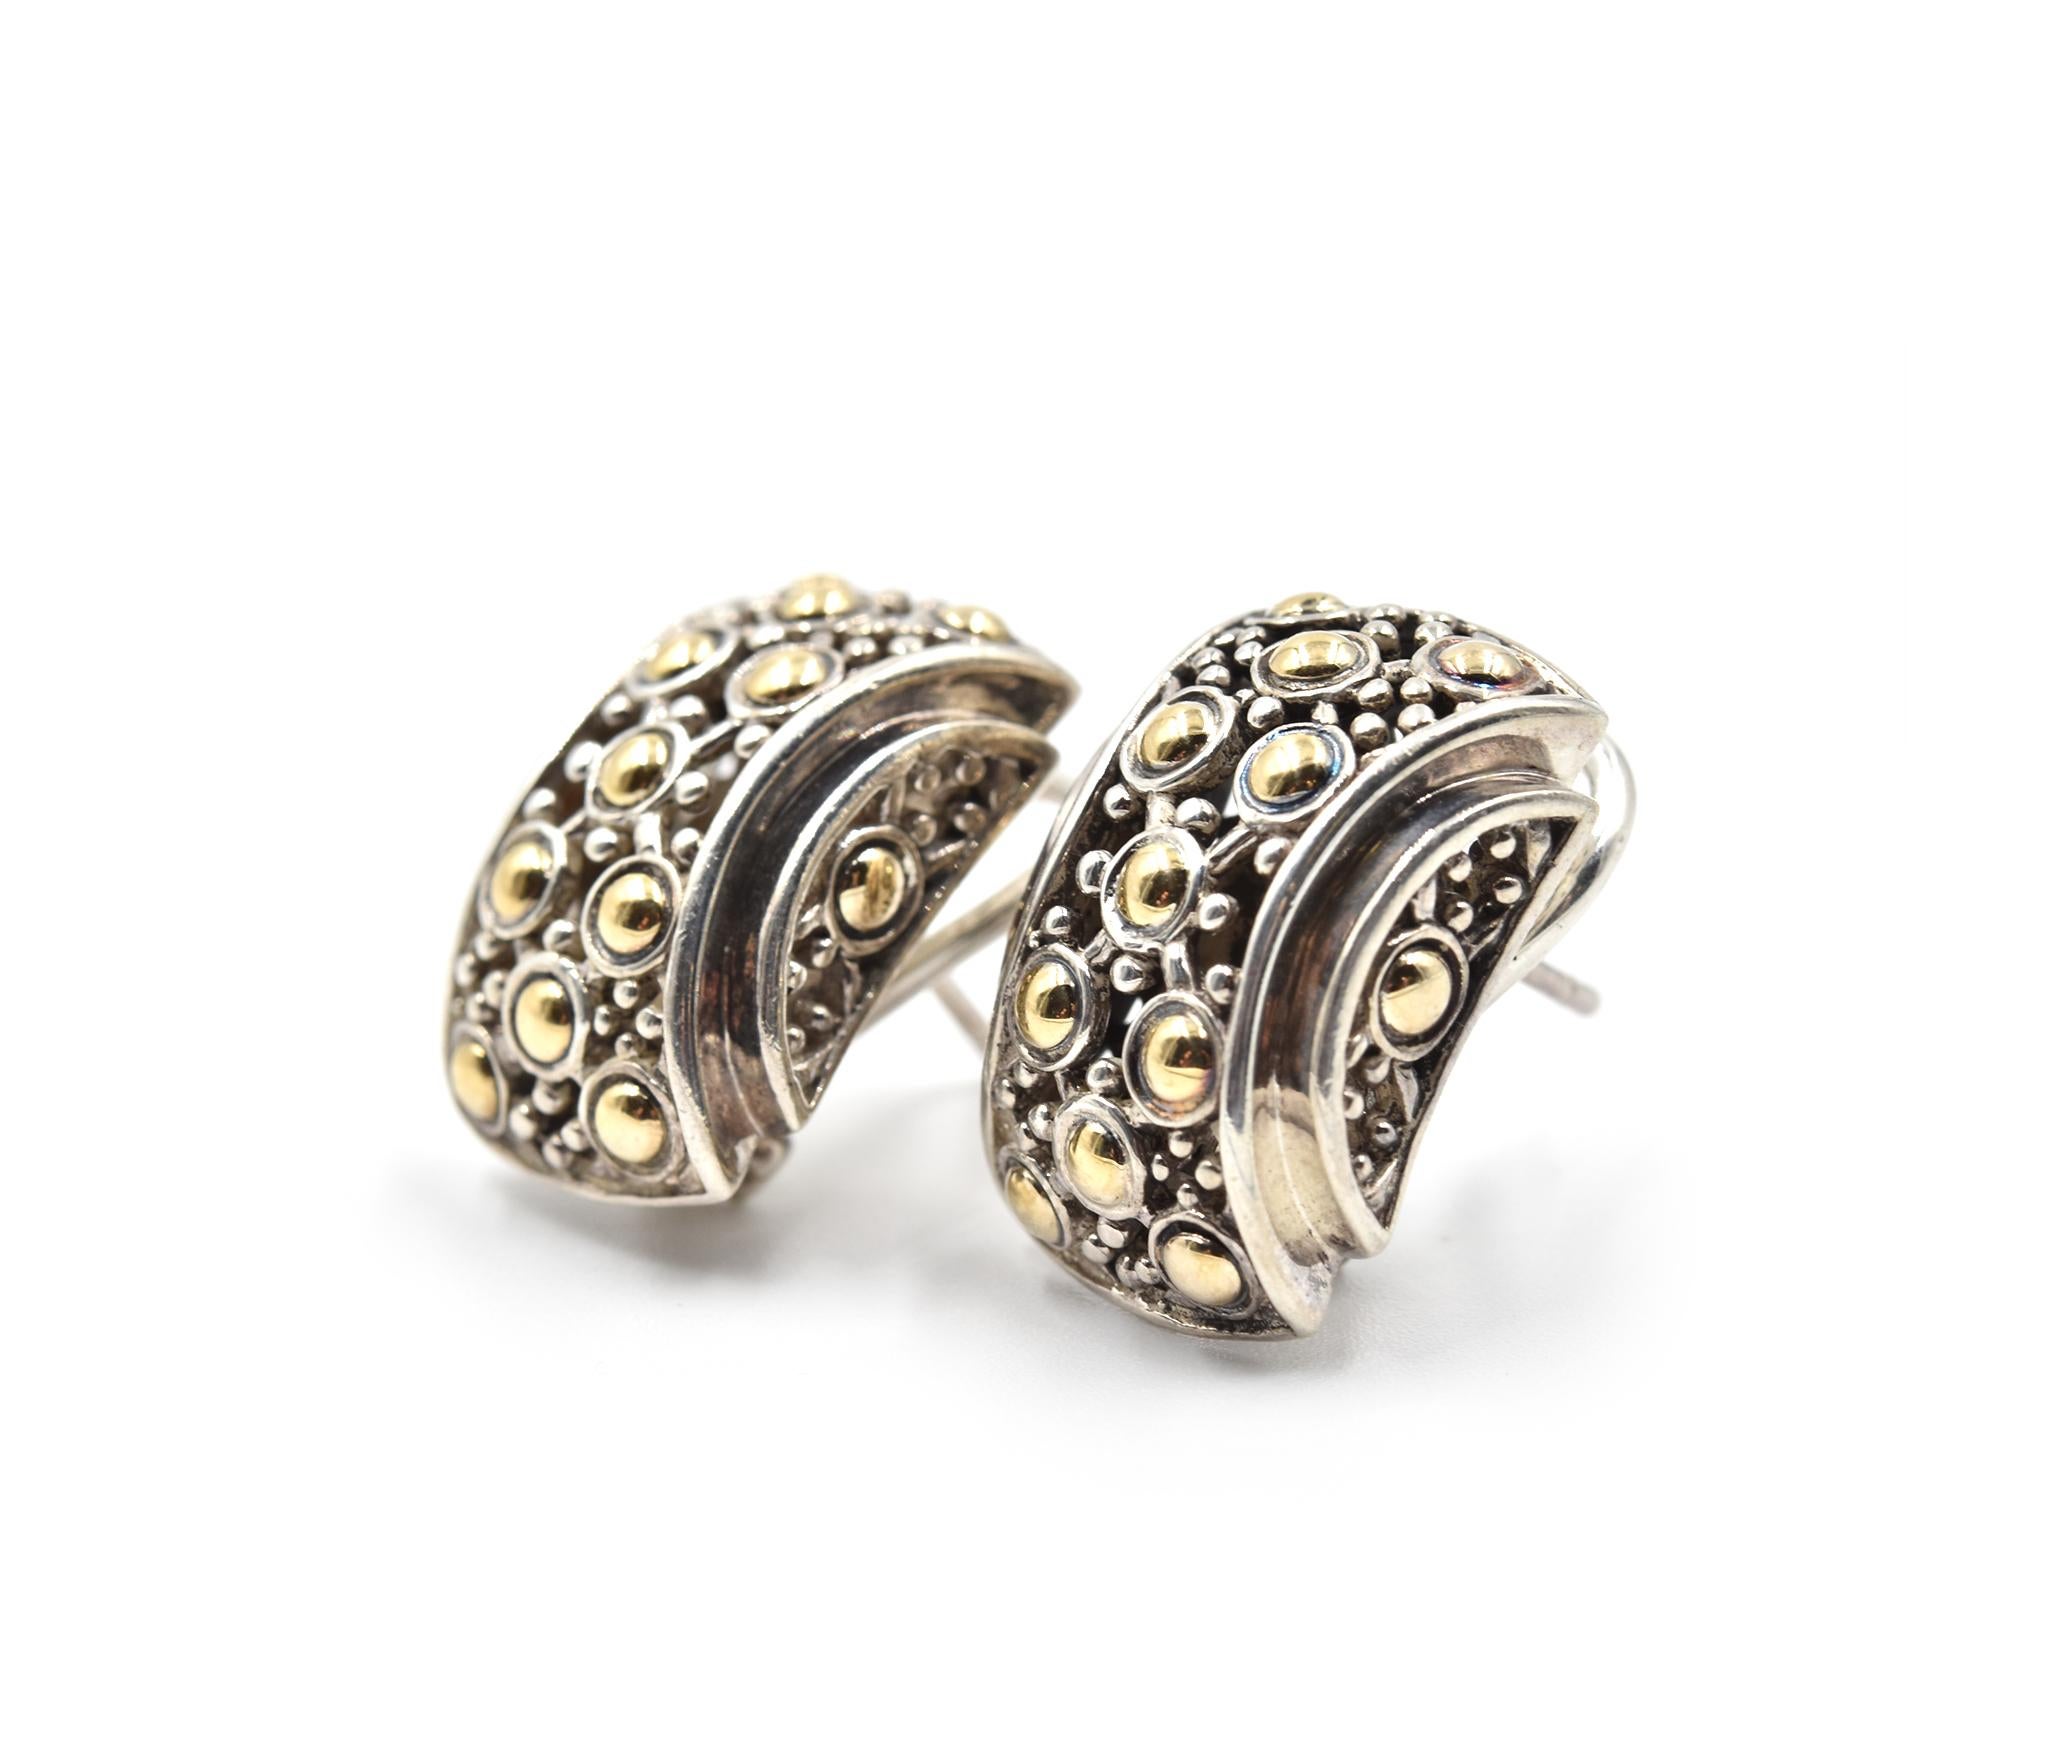 Designer: John Hardy
Material: sterling silver and 18k yellow gold
Dimensions: each earring is 3/4-inch long and 1/2-inch wide
Fastenings: omega backs
Weight: 10.29 grams
